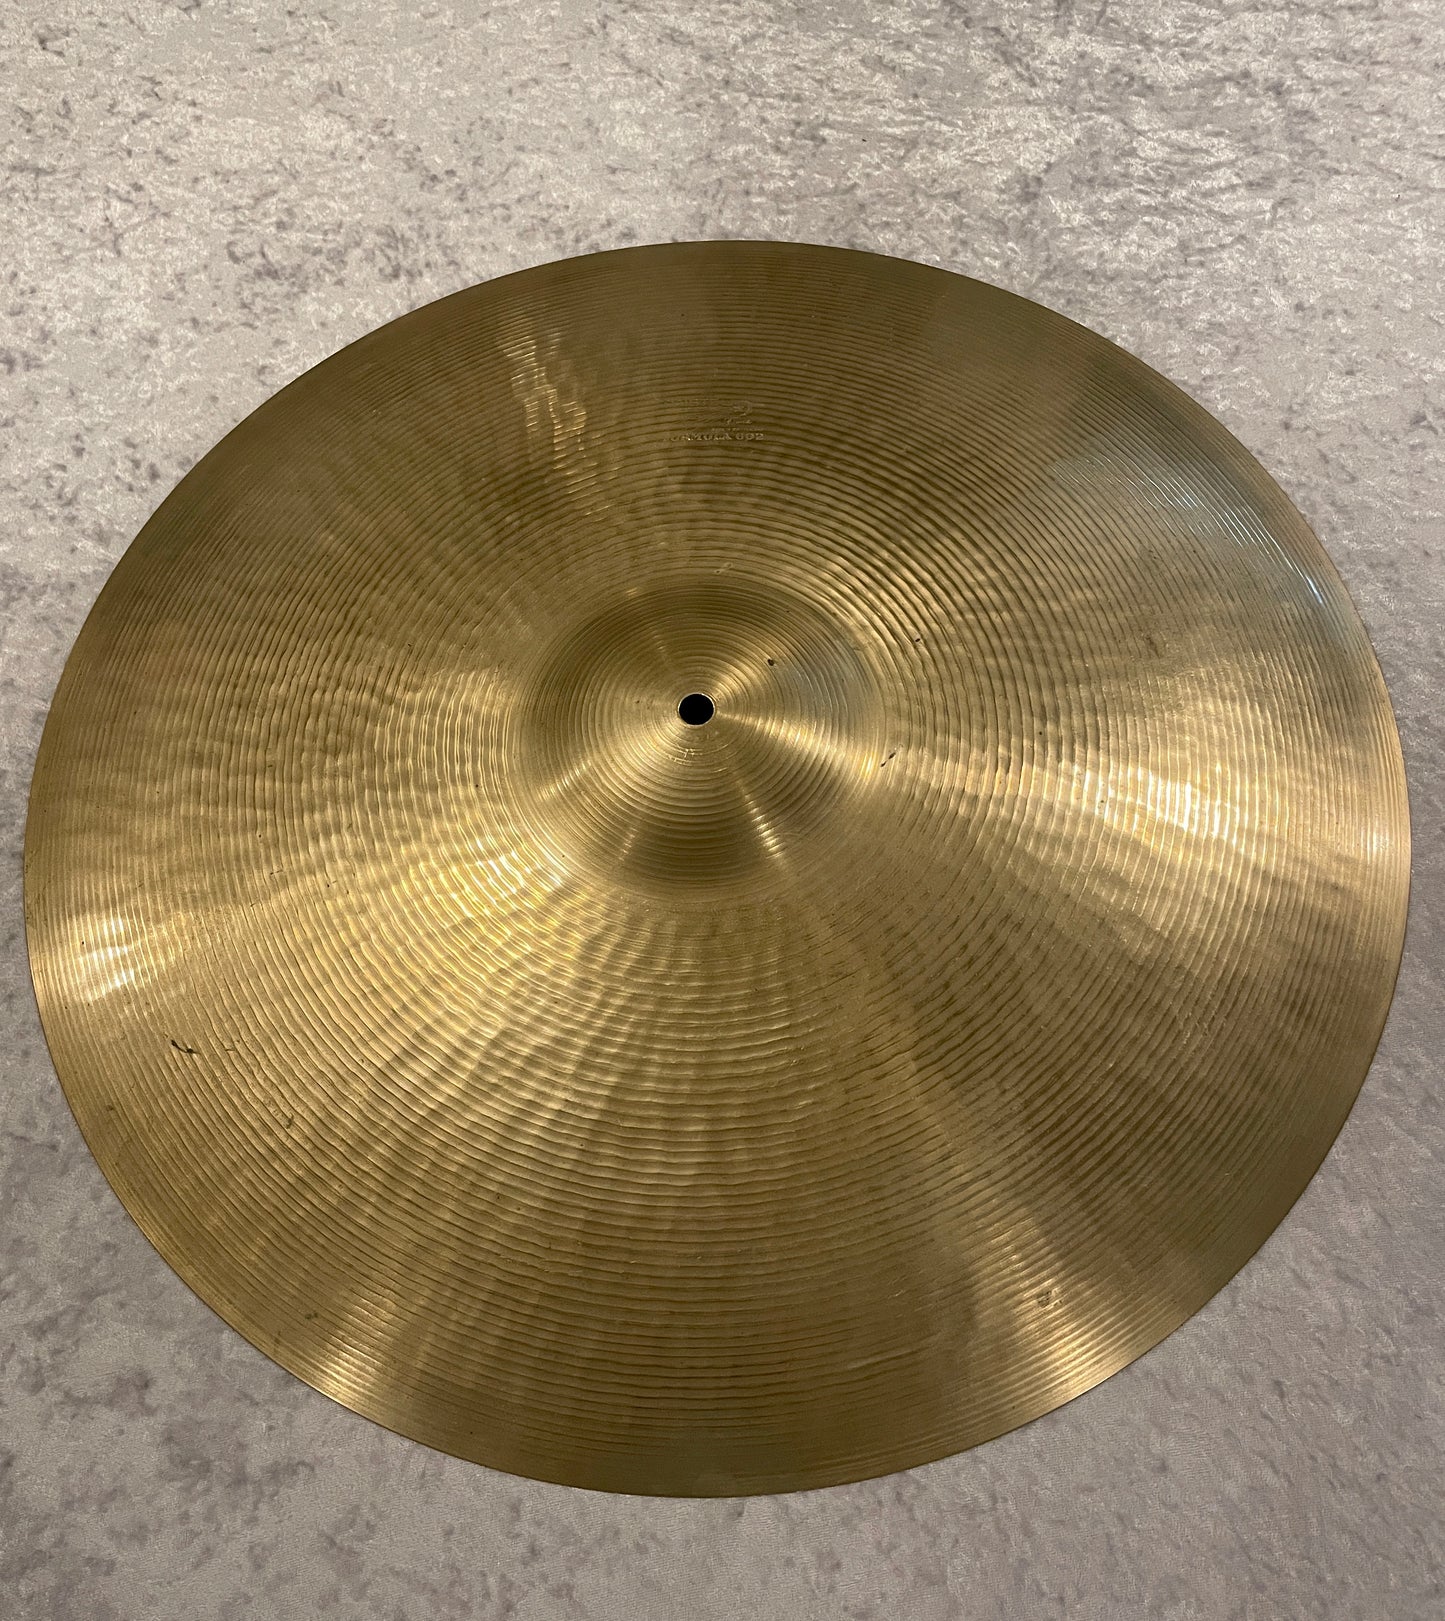 20" Paiste Pre-Serial Number Formula 602 Ride Cymbal 2230g #34